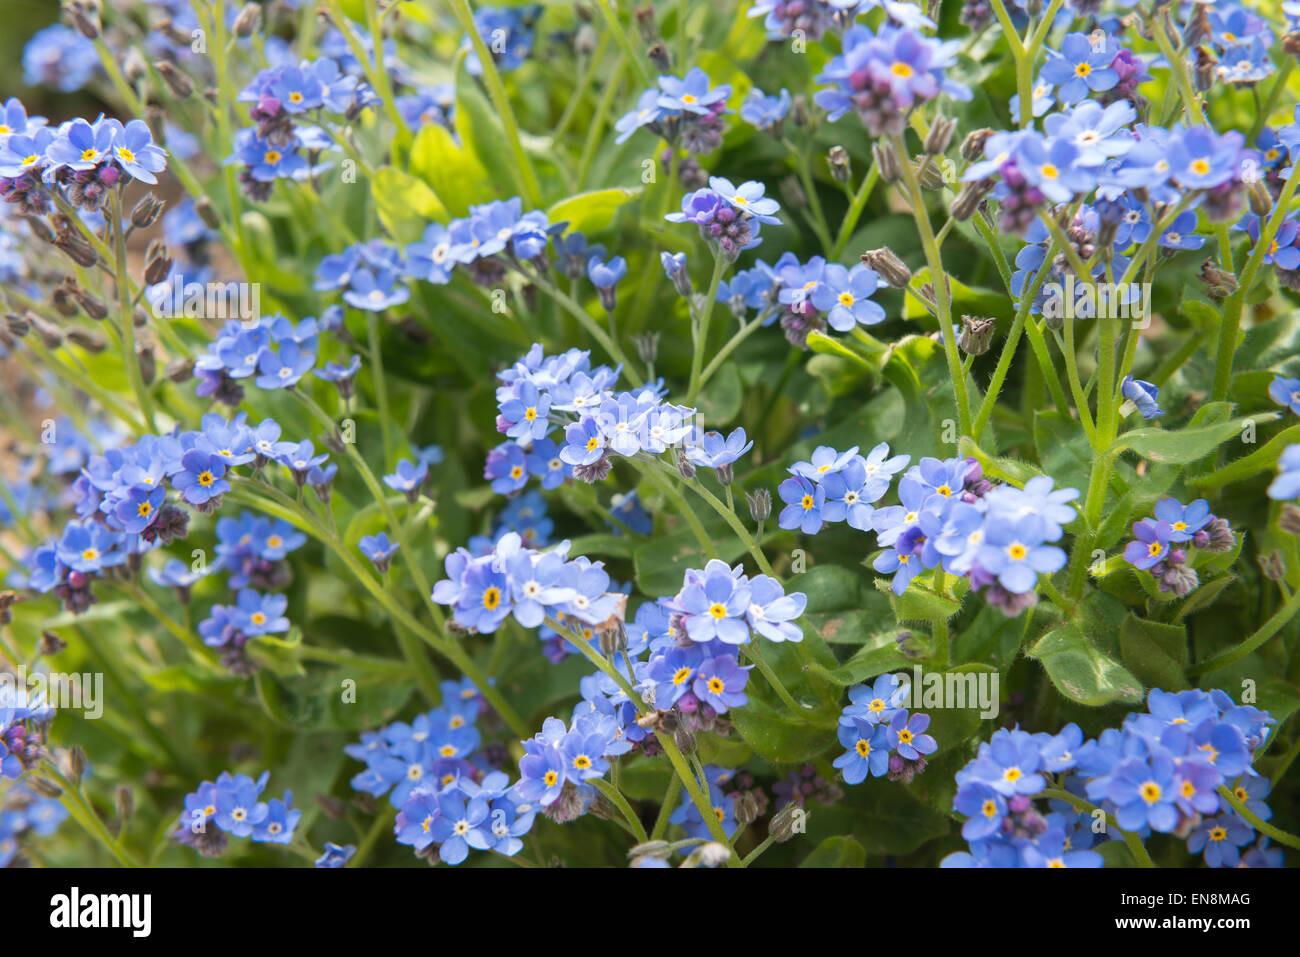 bunch of blooms of rich pastel blue forget-me-not flower against a sea of flowers as background cultivated Stock Photo